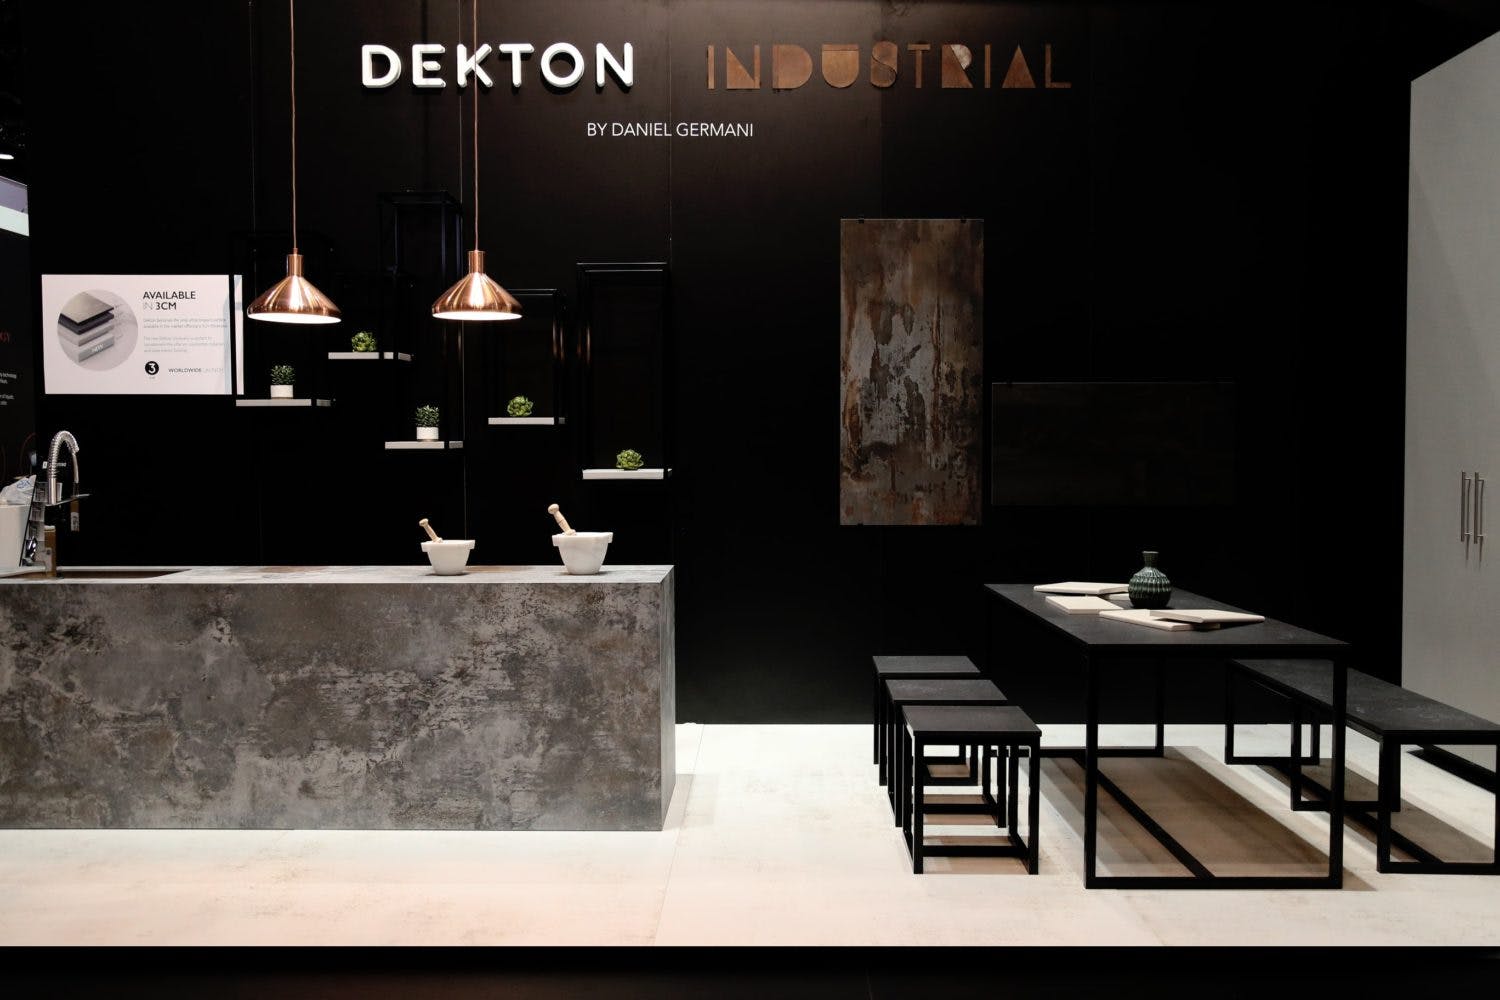 Image 34 of Dekton Industrial Stand Cosentino KBIS 2018 lr 1500x1000 5 in Cosentino presents its novelties at Swissbau and at IDS - Cosentino